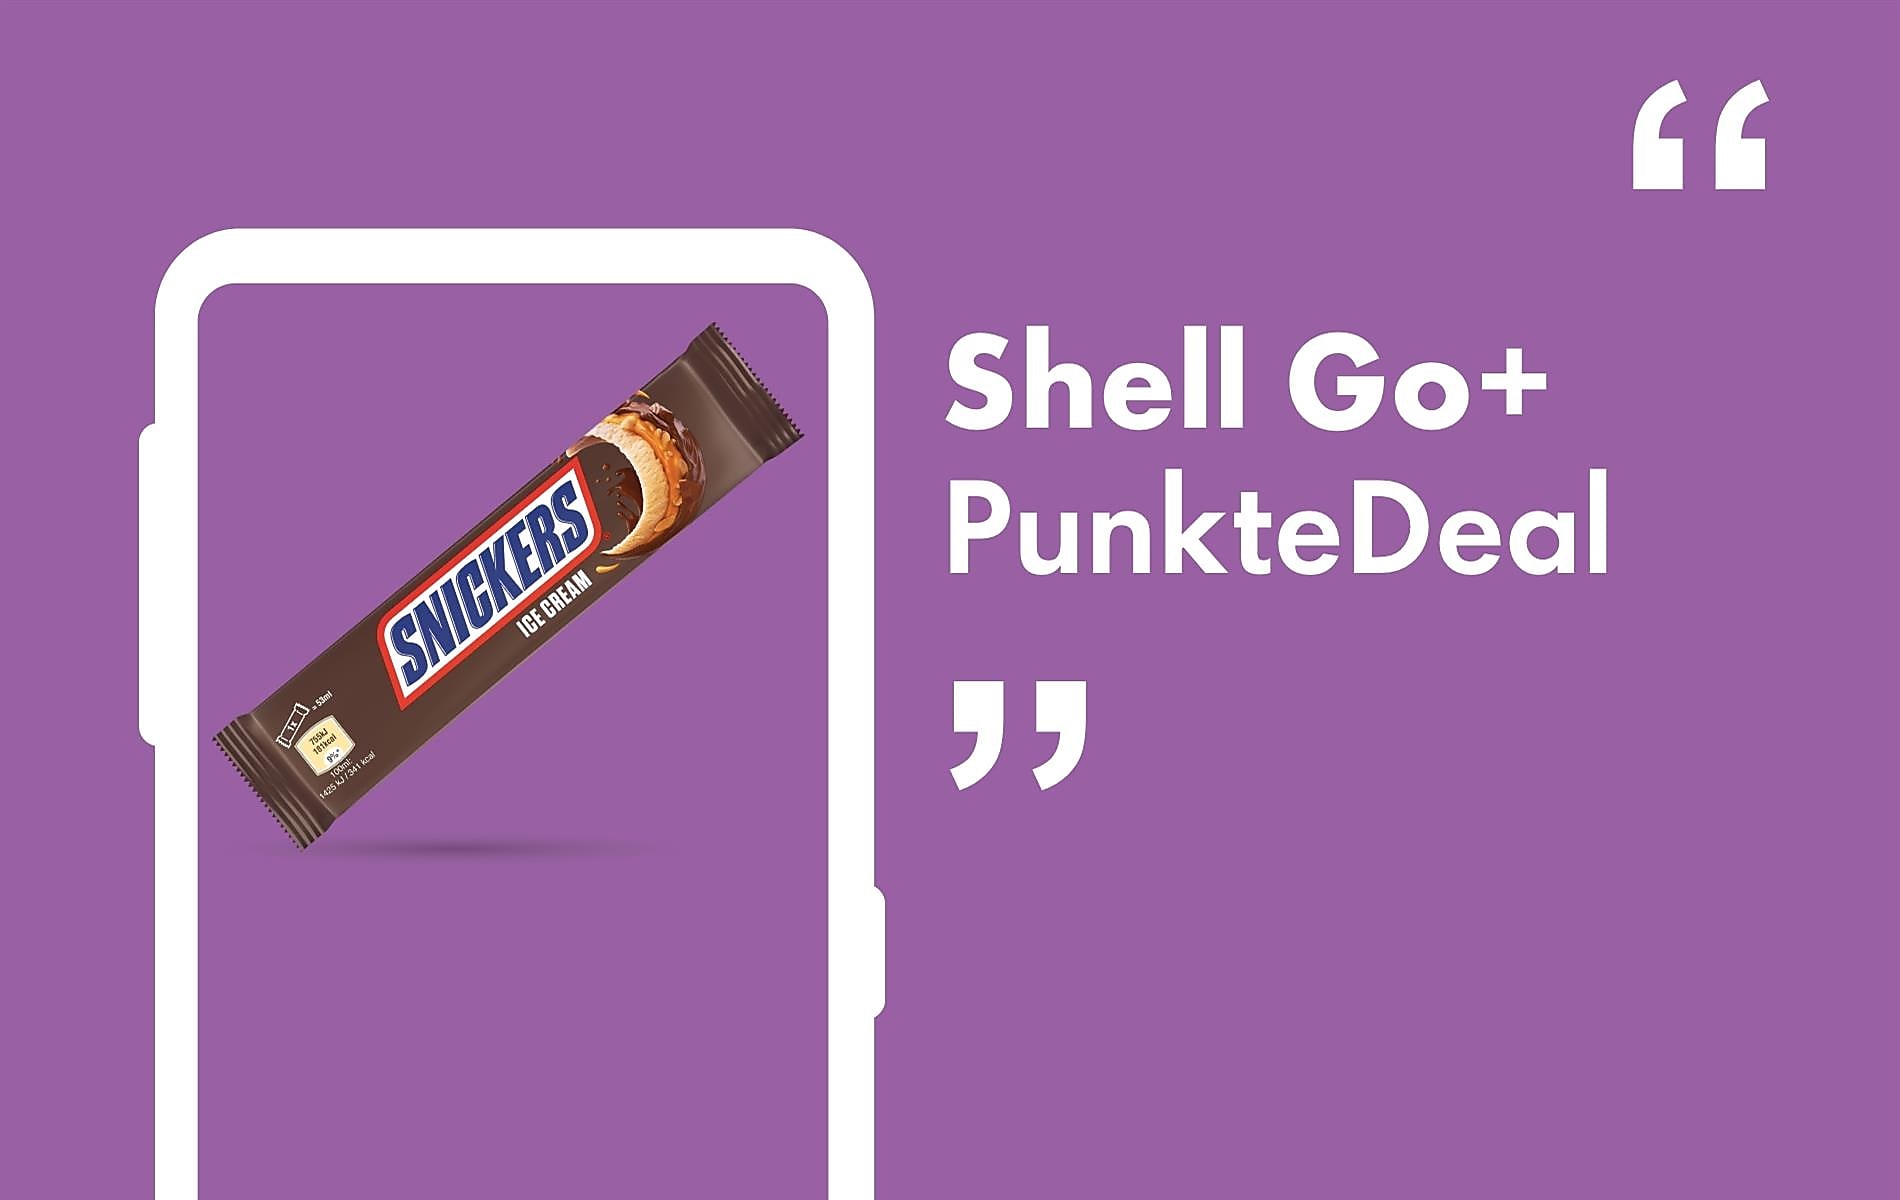 Shell Go+ Punktedeal: Snickers Ice um 200 Pkt.